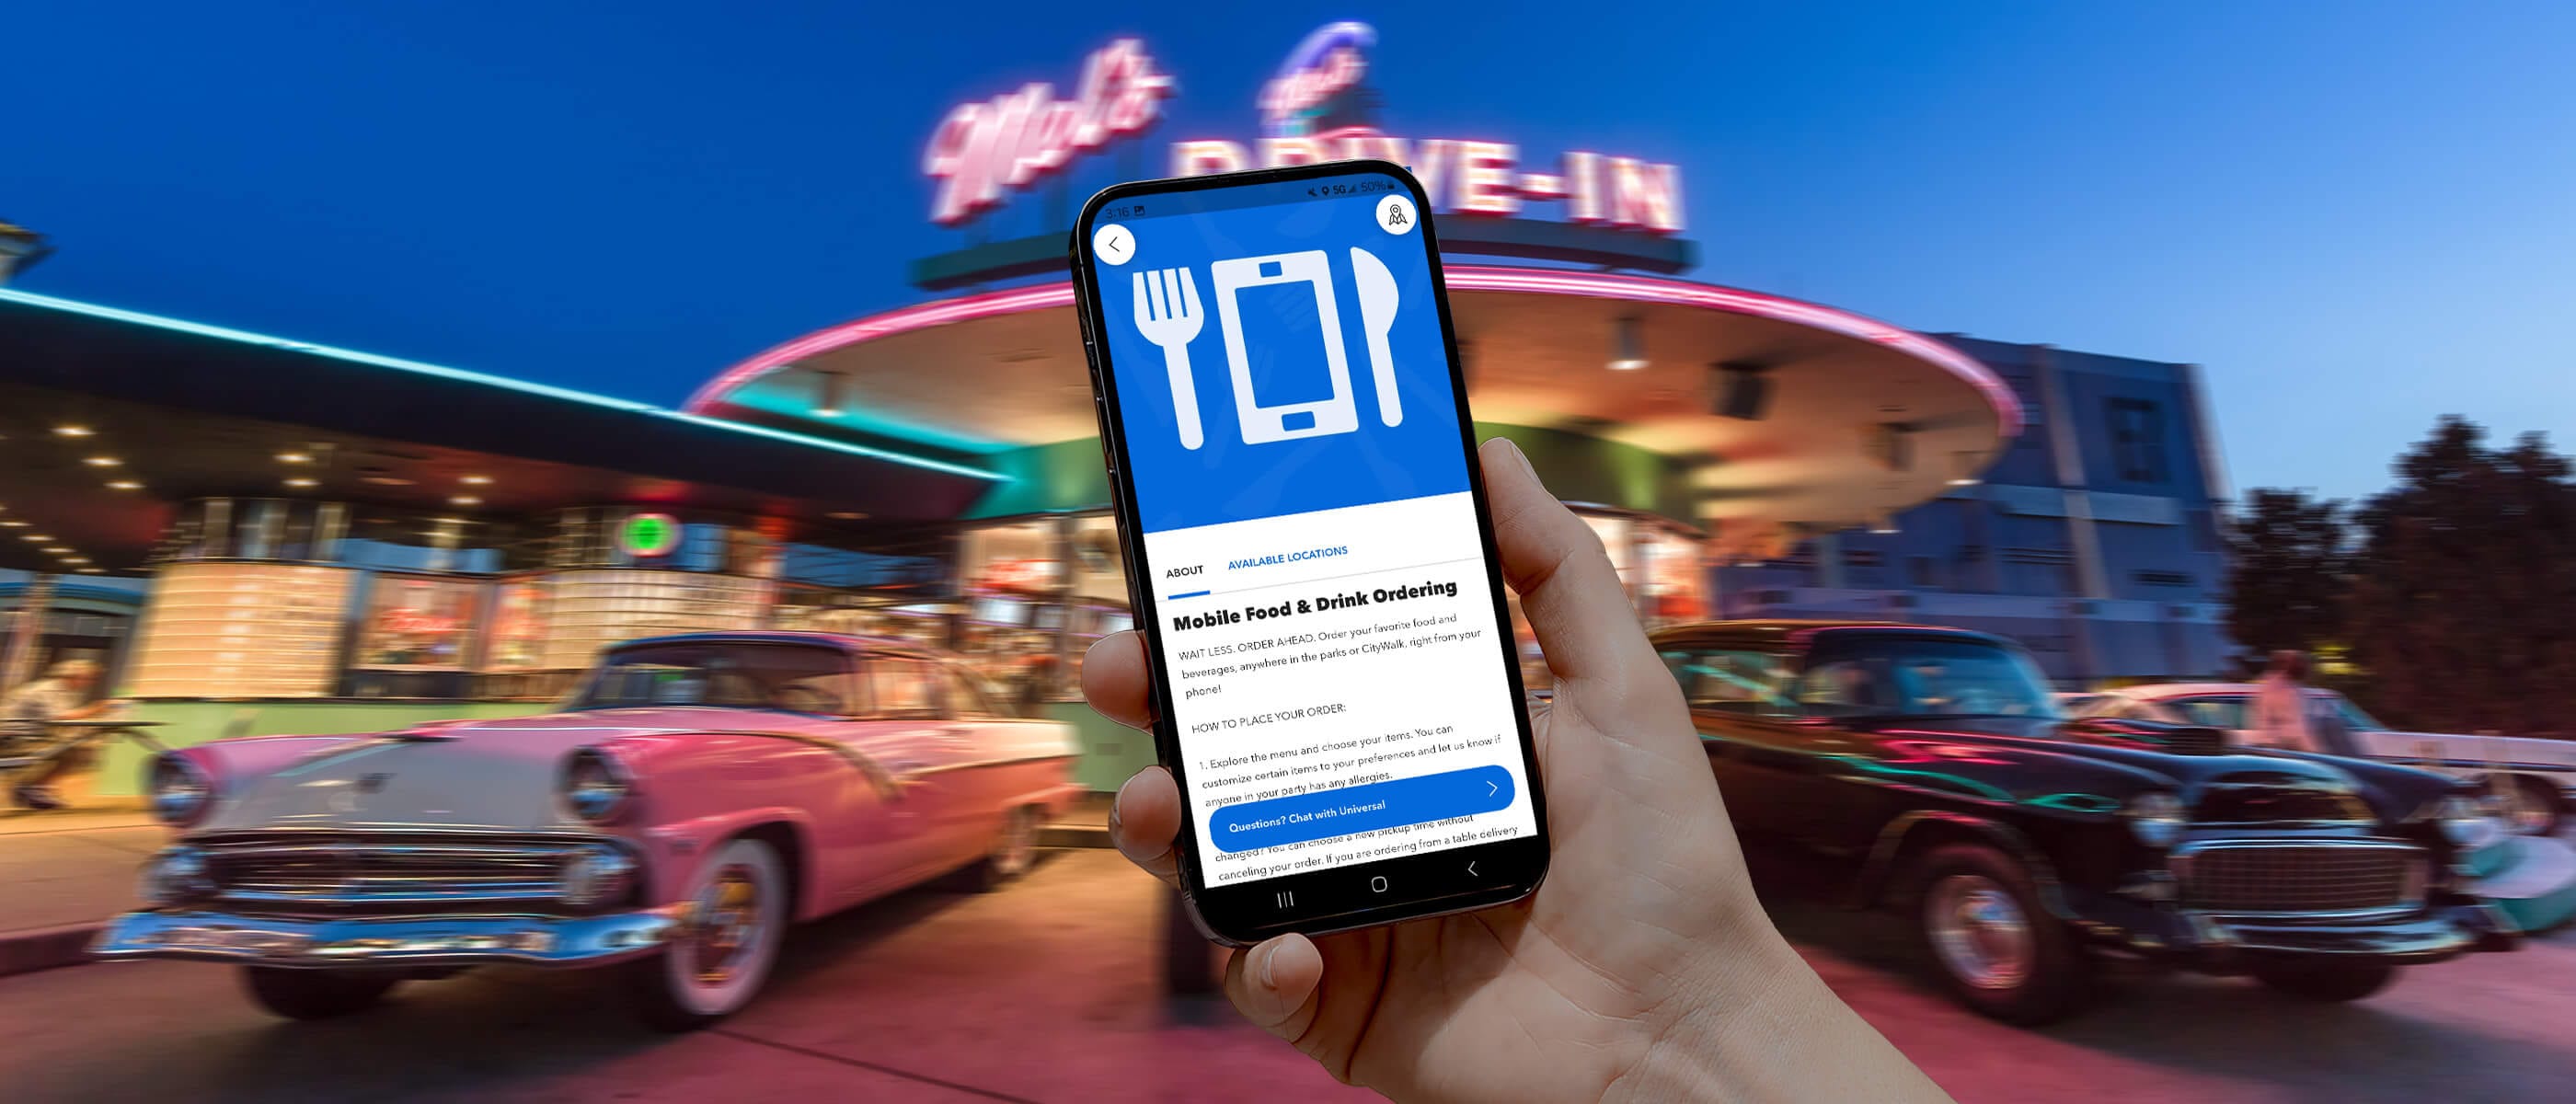 A hand holding a phone using Mobile Food and Drink Ordering on the Universal Orlando Resort App in front of Mel’s Drive-In.